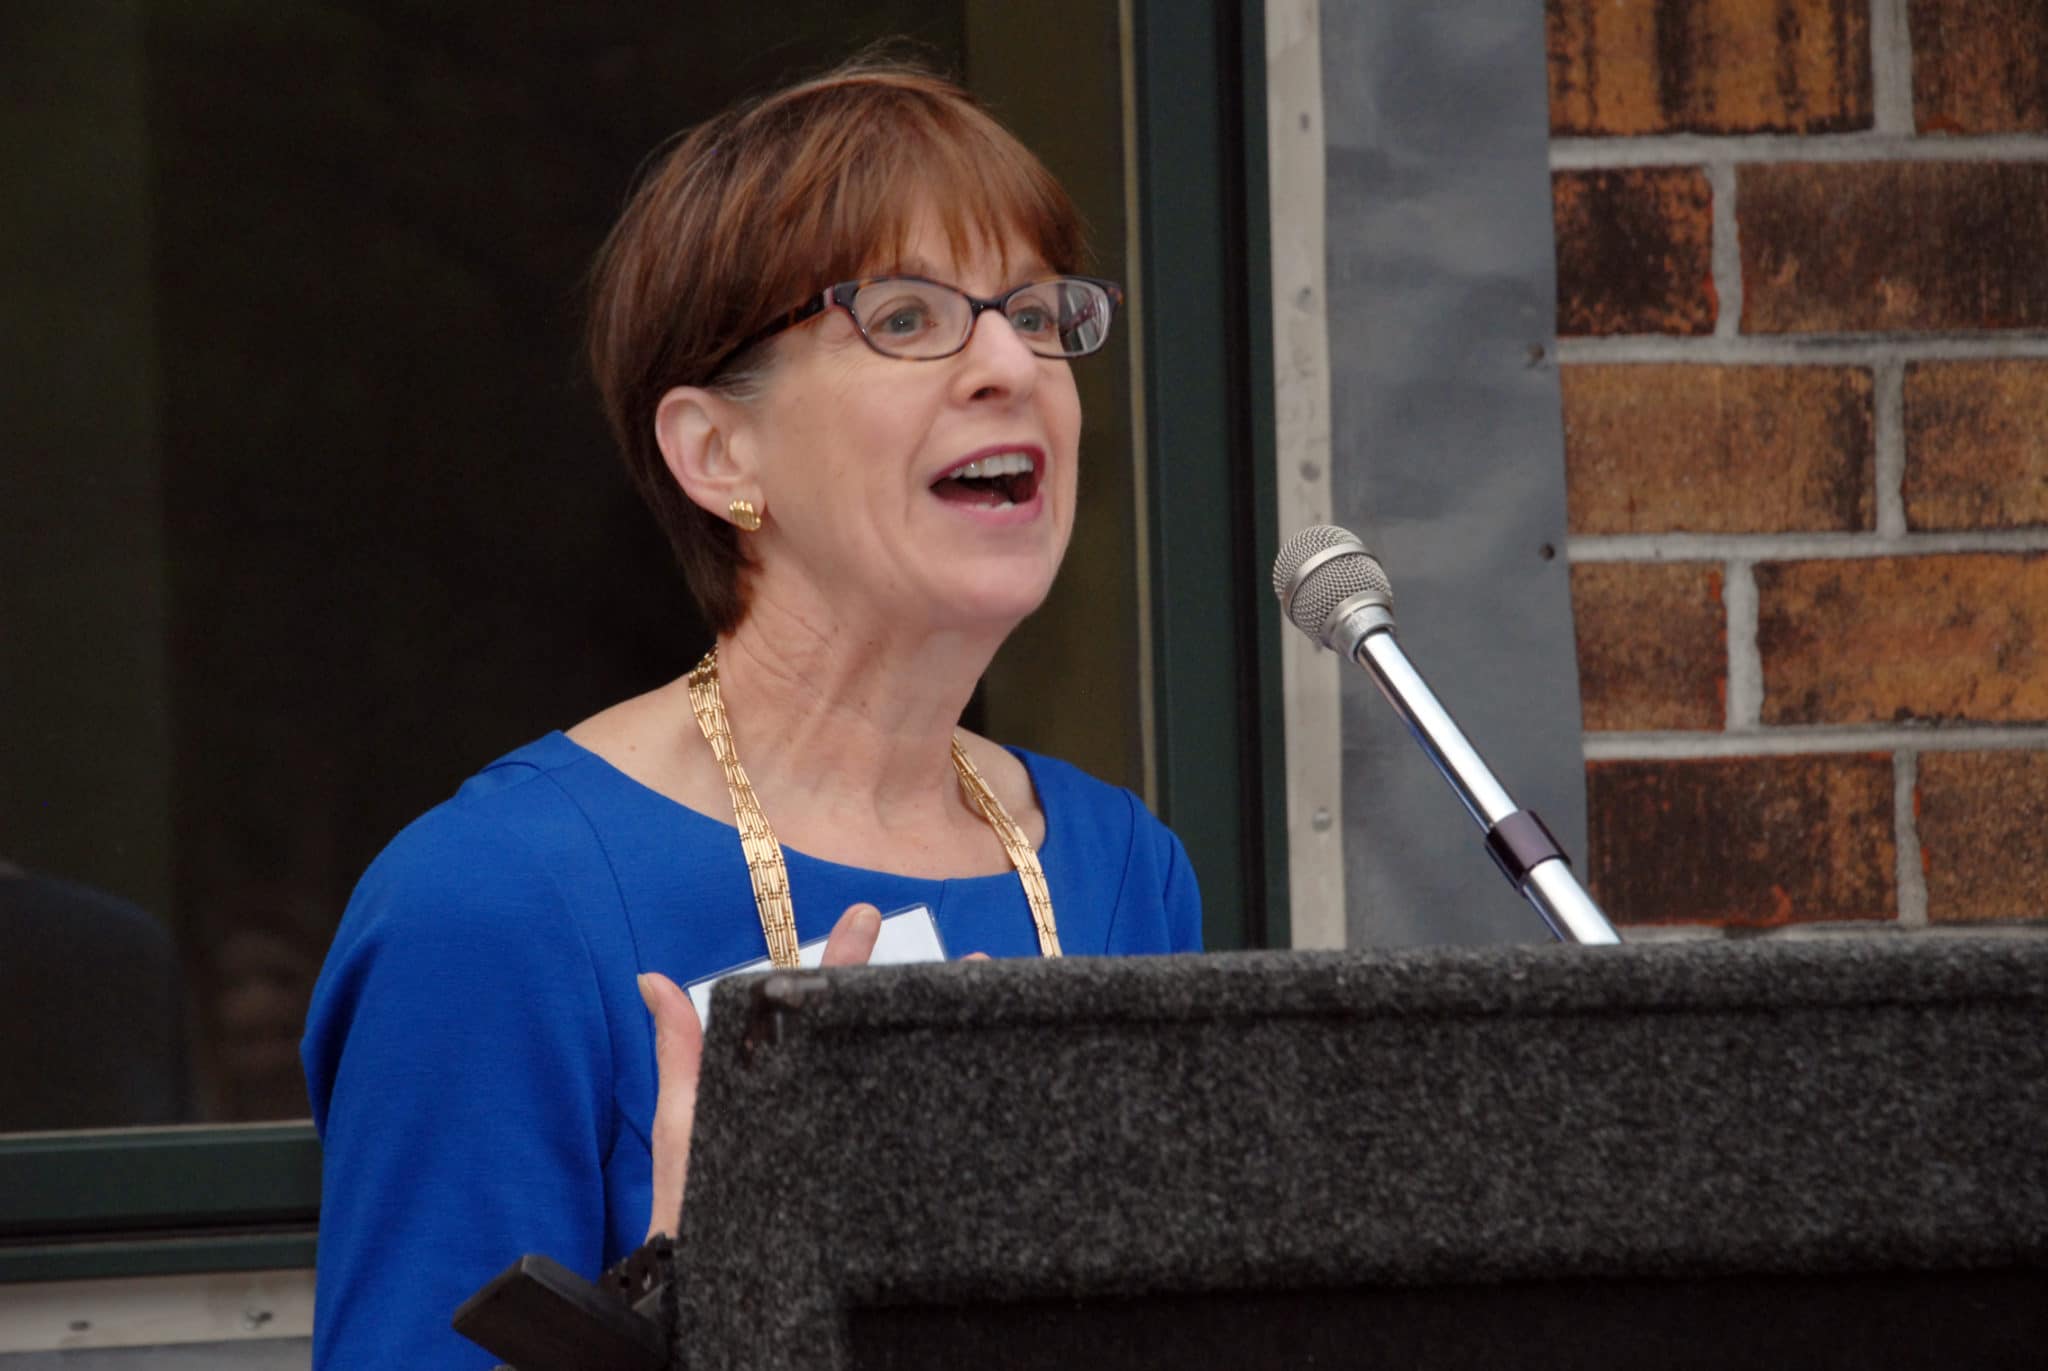 May 15, 2015, Elaine Katz, senior vice president of grants and communications for the Kessler Foundation, received the Betty Pendler Award from Community Options Inc. at the Daily Plan It – Farber Rd – Ribbon Cutting ceremony.